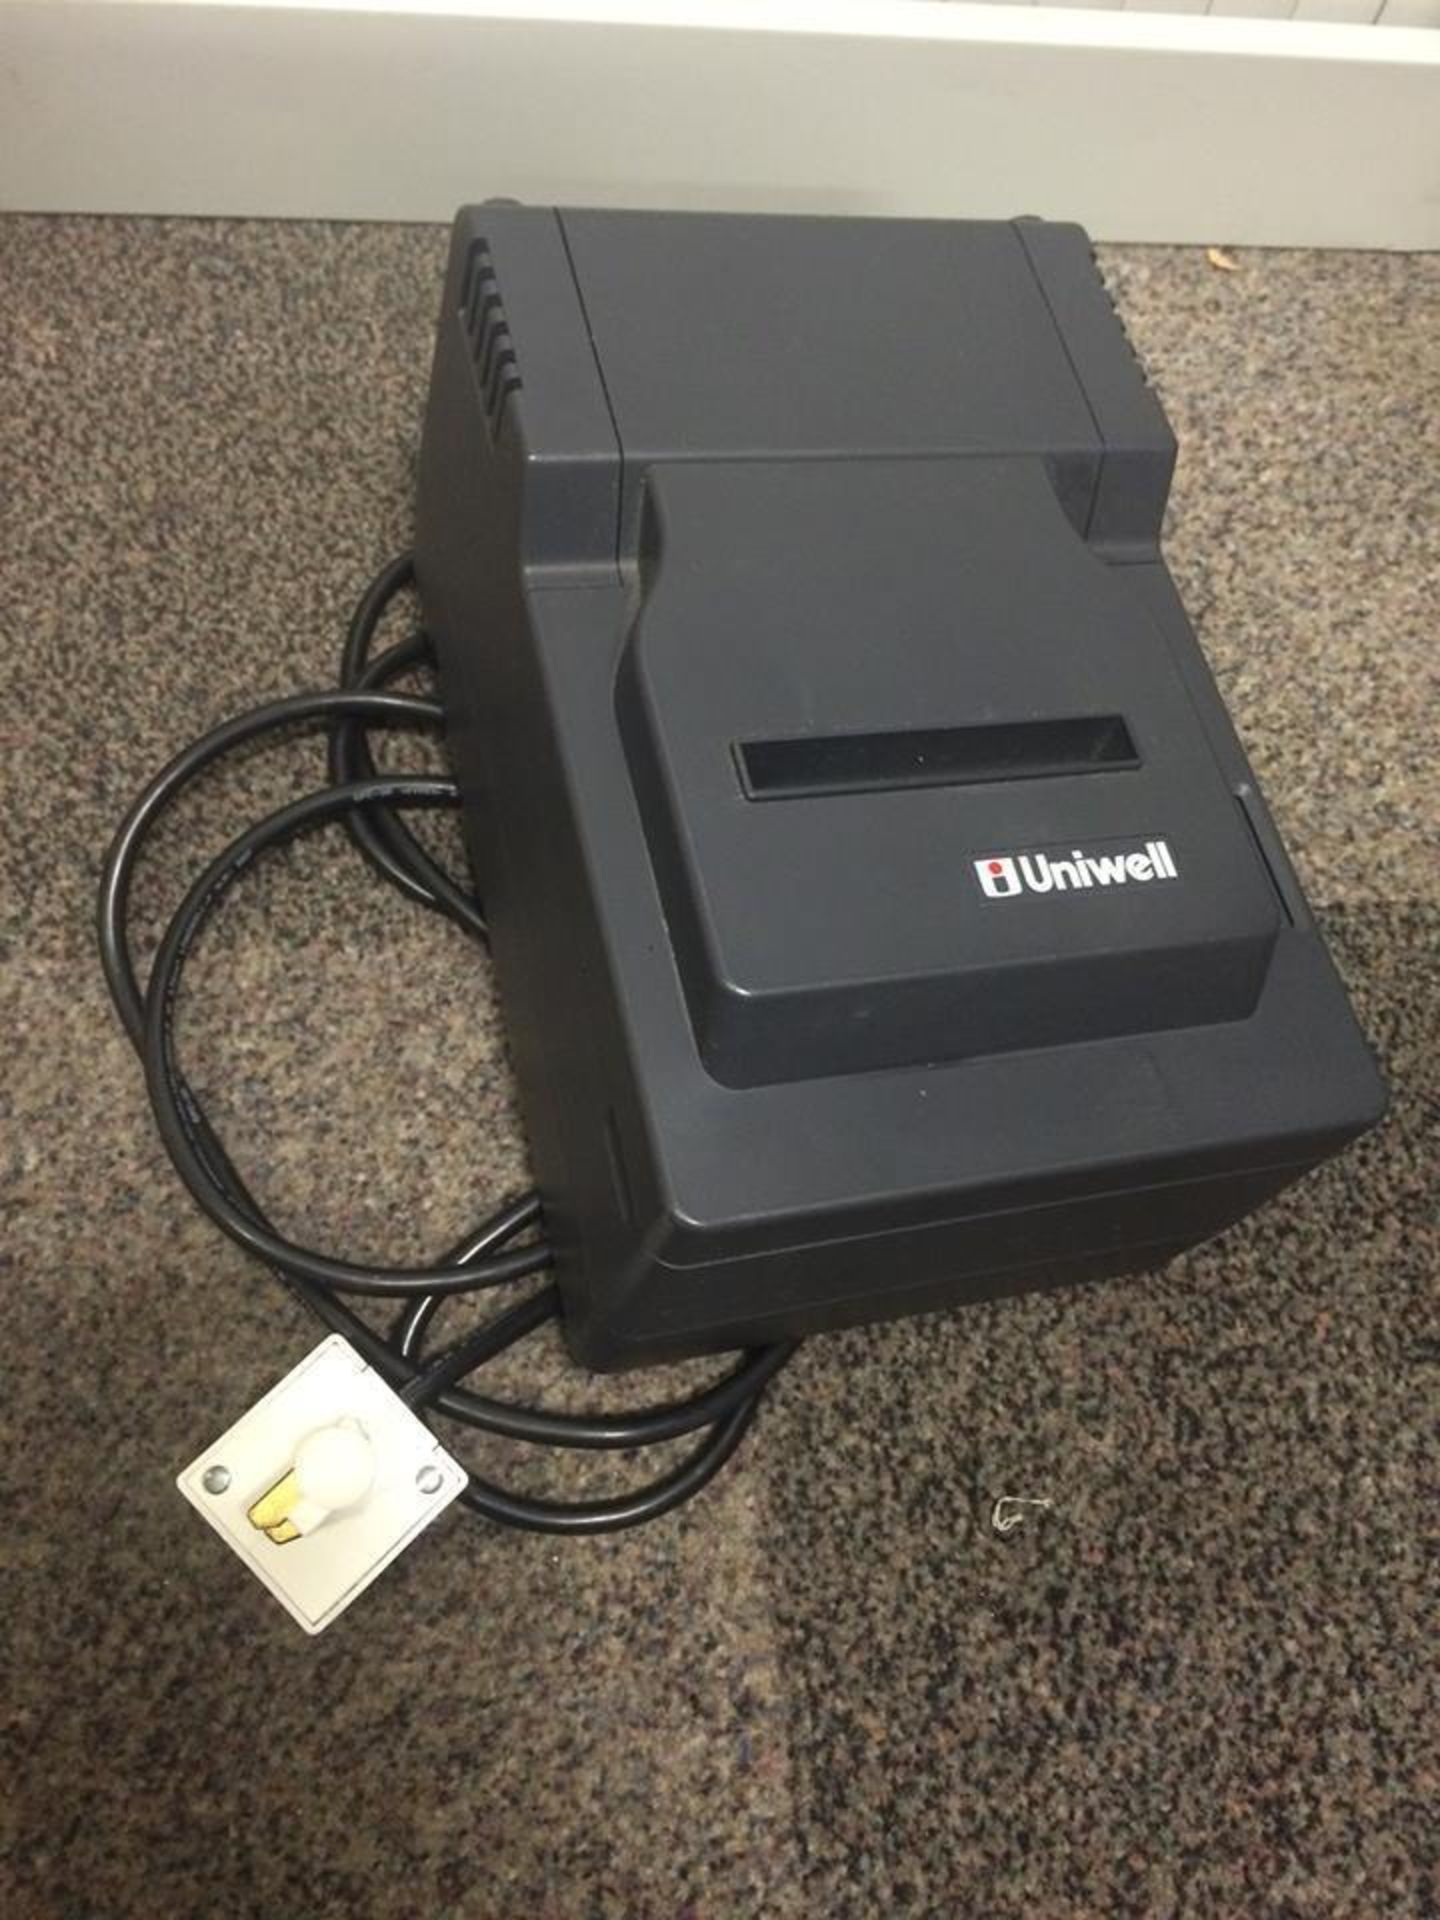 Uniwell Tp-932 / Tp932 Pos Thermal Printer With Ethernet Interface 822 922 832 PLEASE READ LOT 0